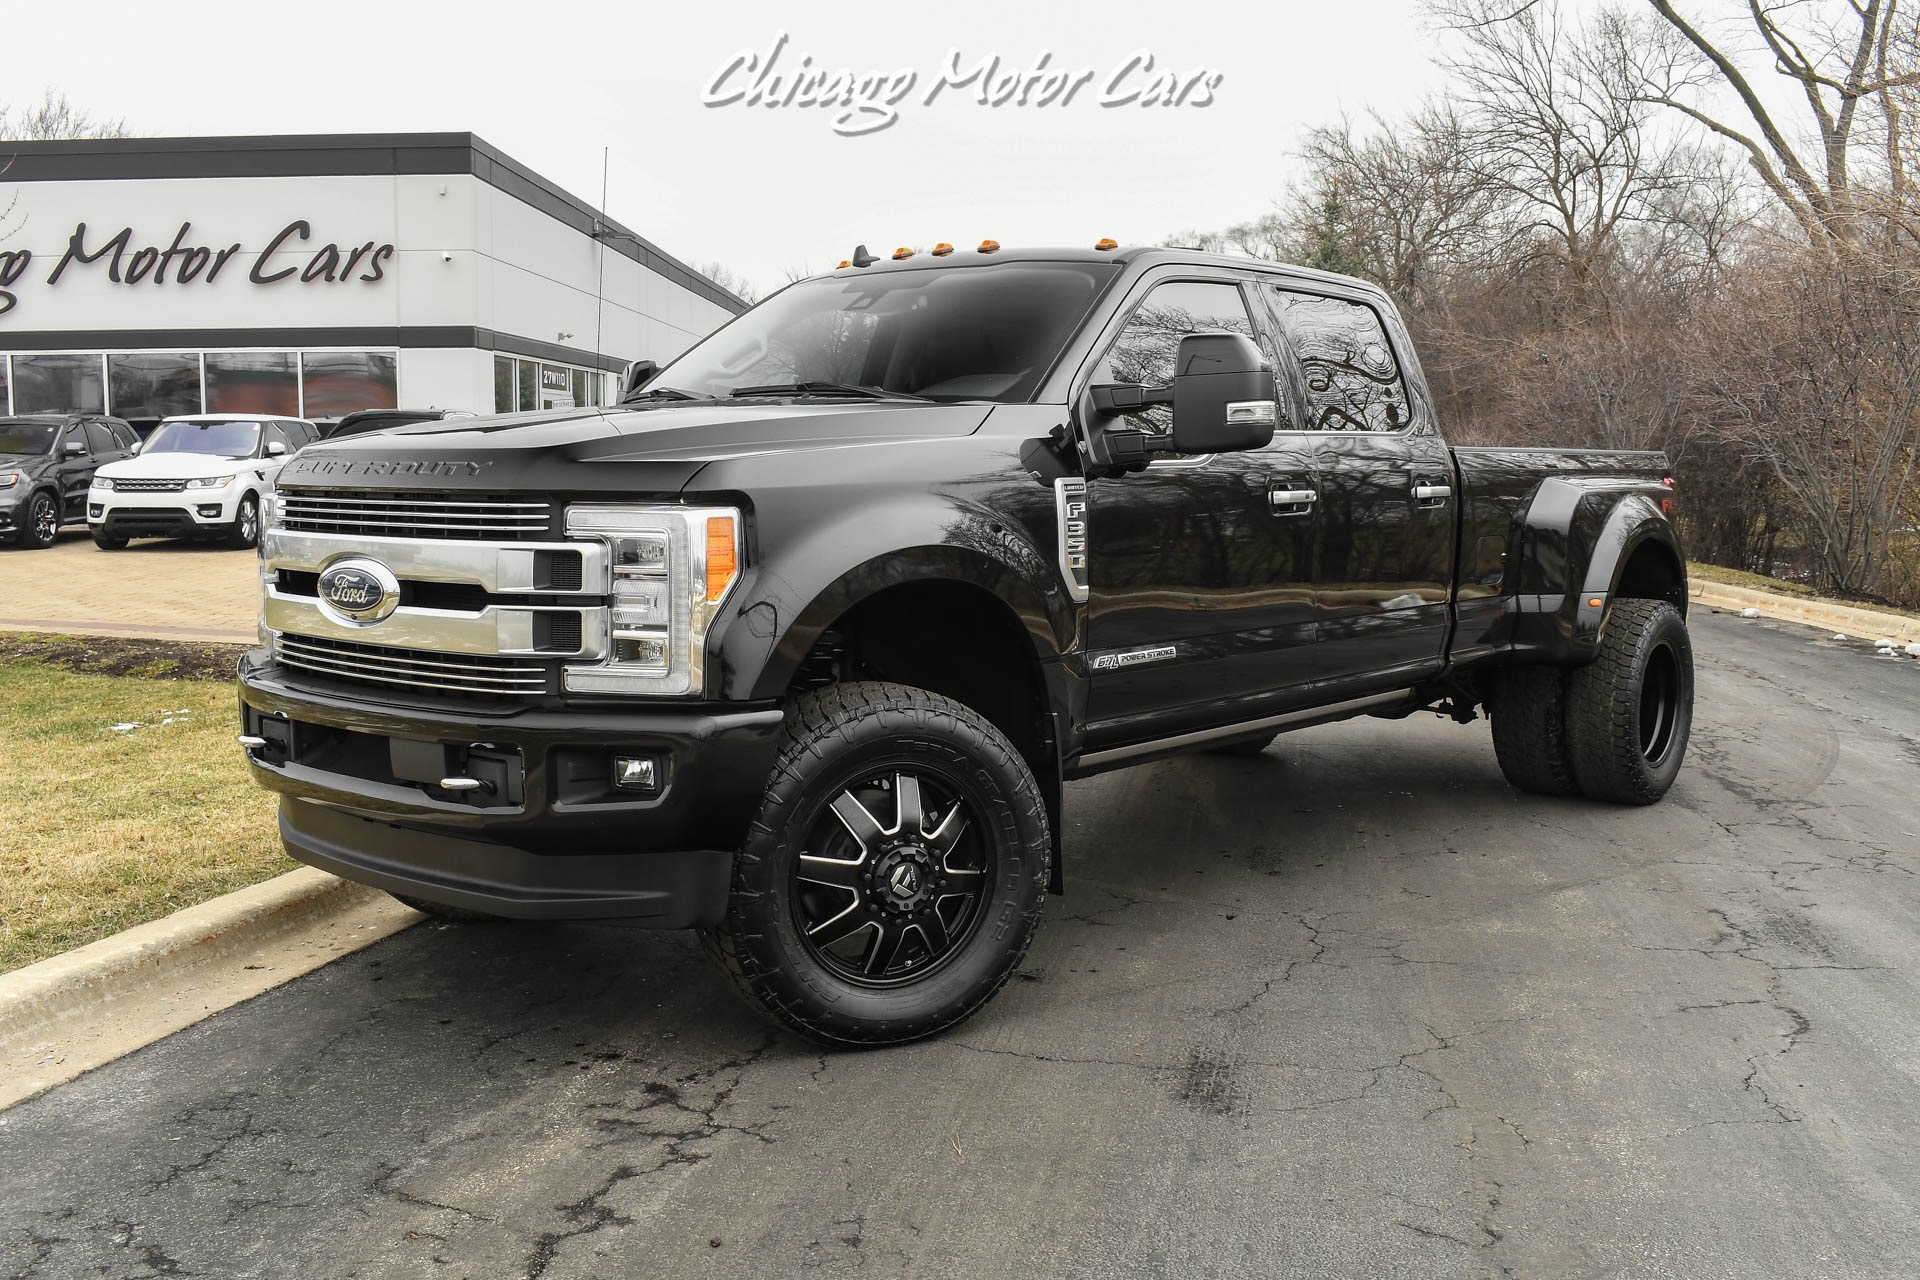 Used-2019-Ford-F-350-Super-Duty-Limited-Lifted-and-Upgraded-Wheels-PowerStroke-67L-Diesel